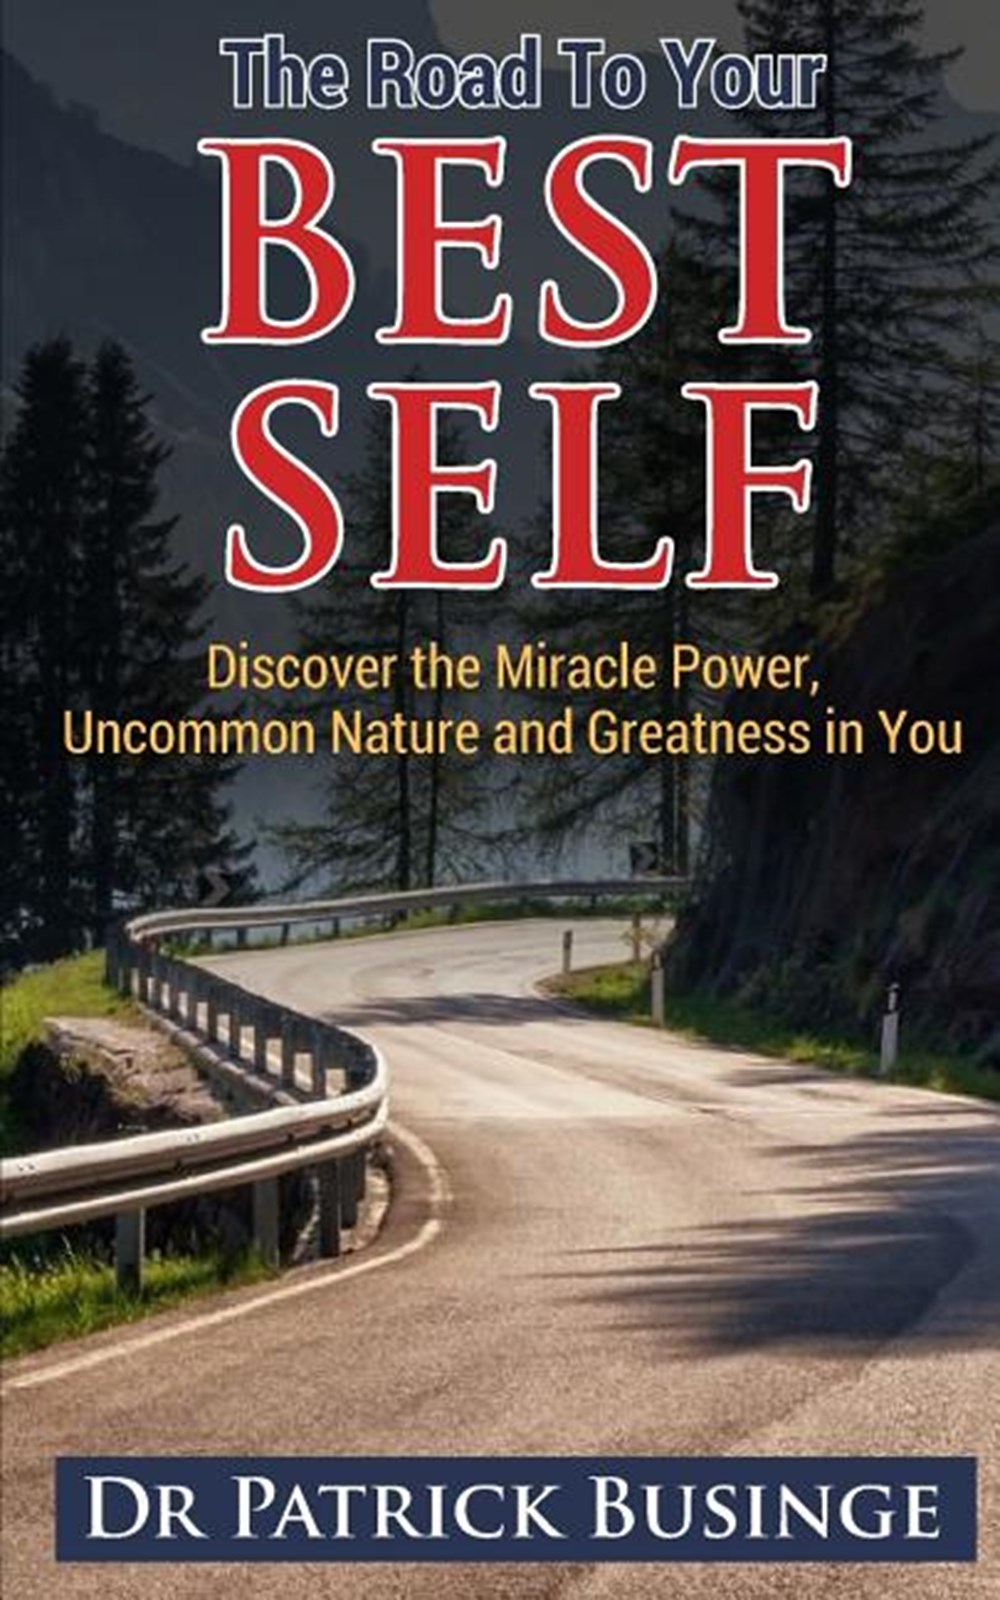 Road to Your Best Self: Discover the Miracle Power, Uncommon Nature and Greatness in You